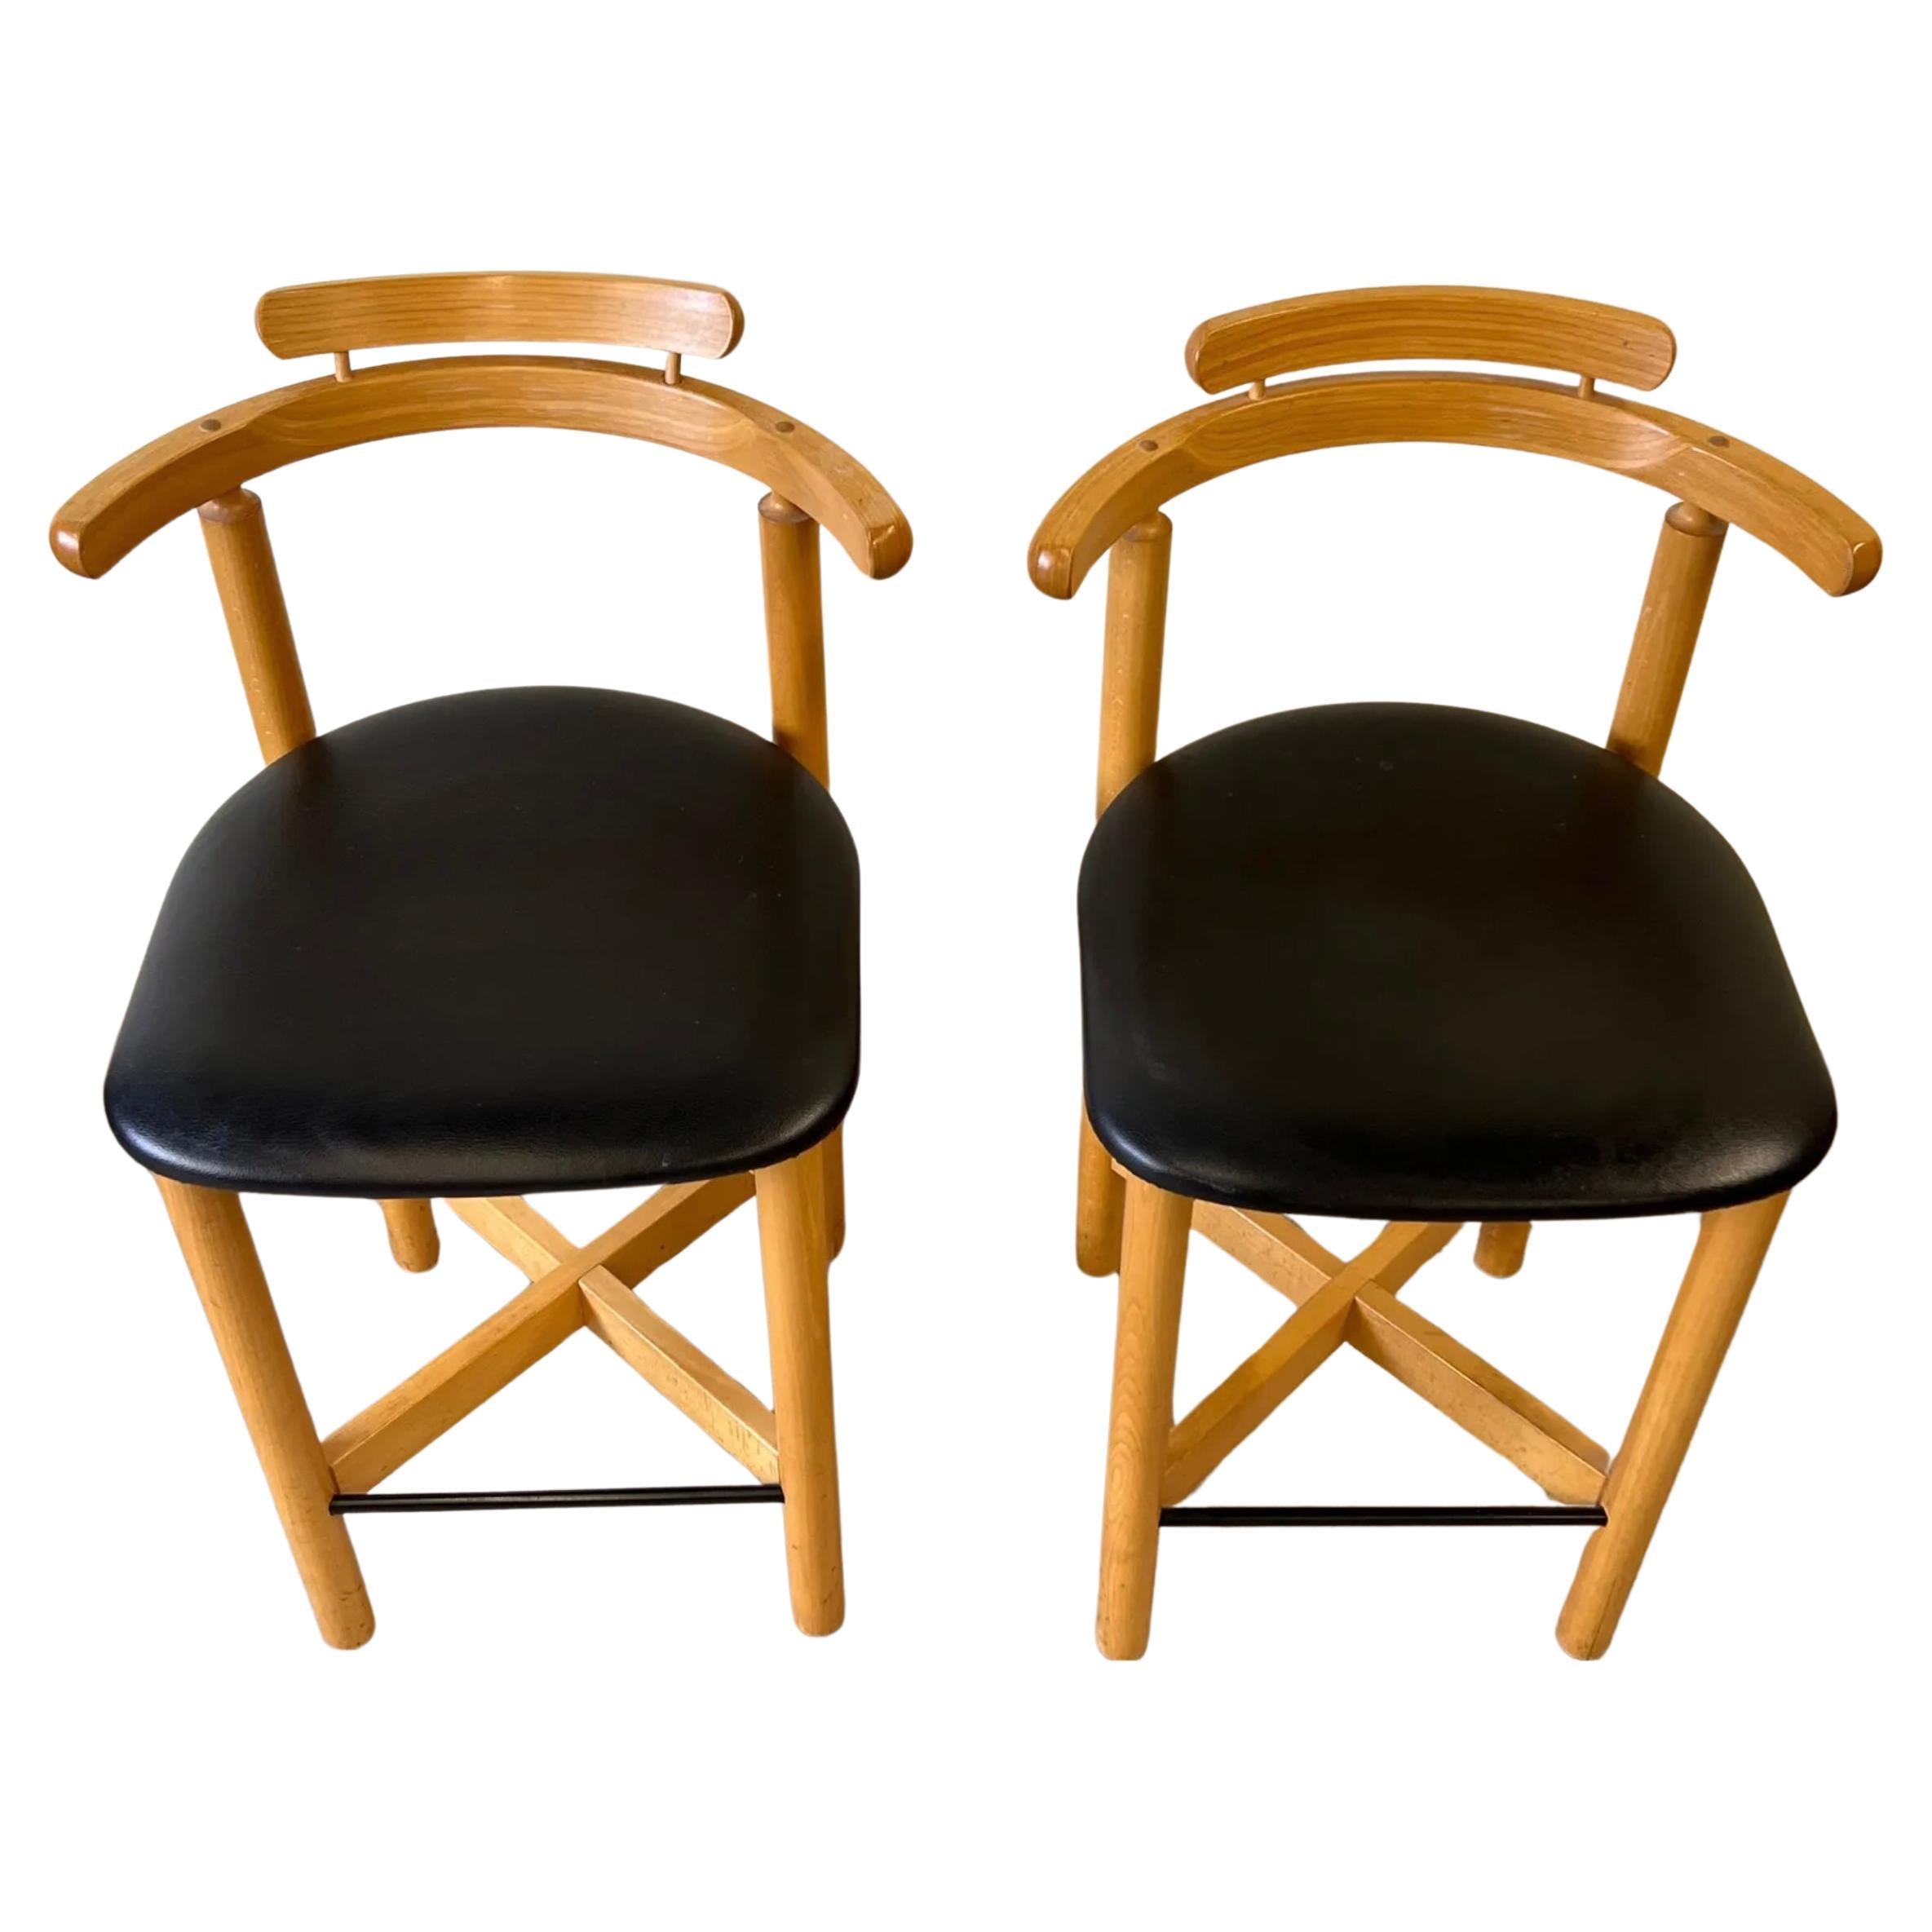 Pair of Gangsø Møbler Danish modern bar stools with X-form stretcher bases. Counter height stools Blonde wood with Black Upholstery seat. Made in Denmark Located in Brooklyn NYC.

34